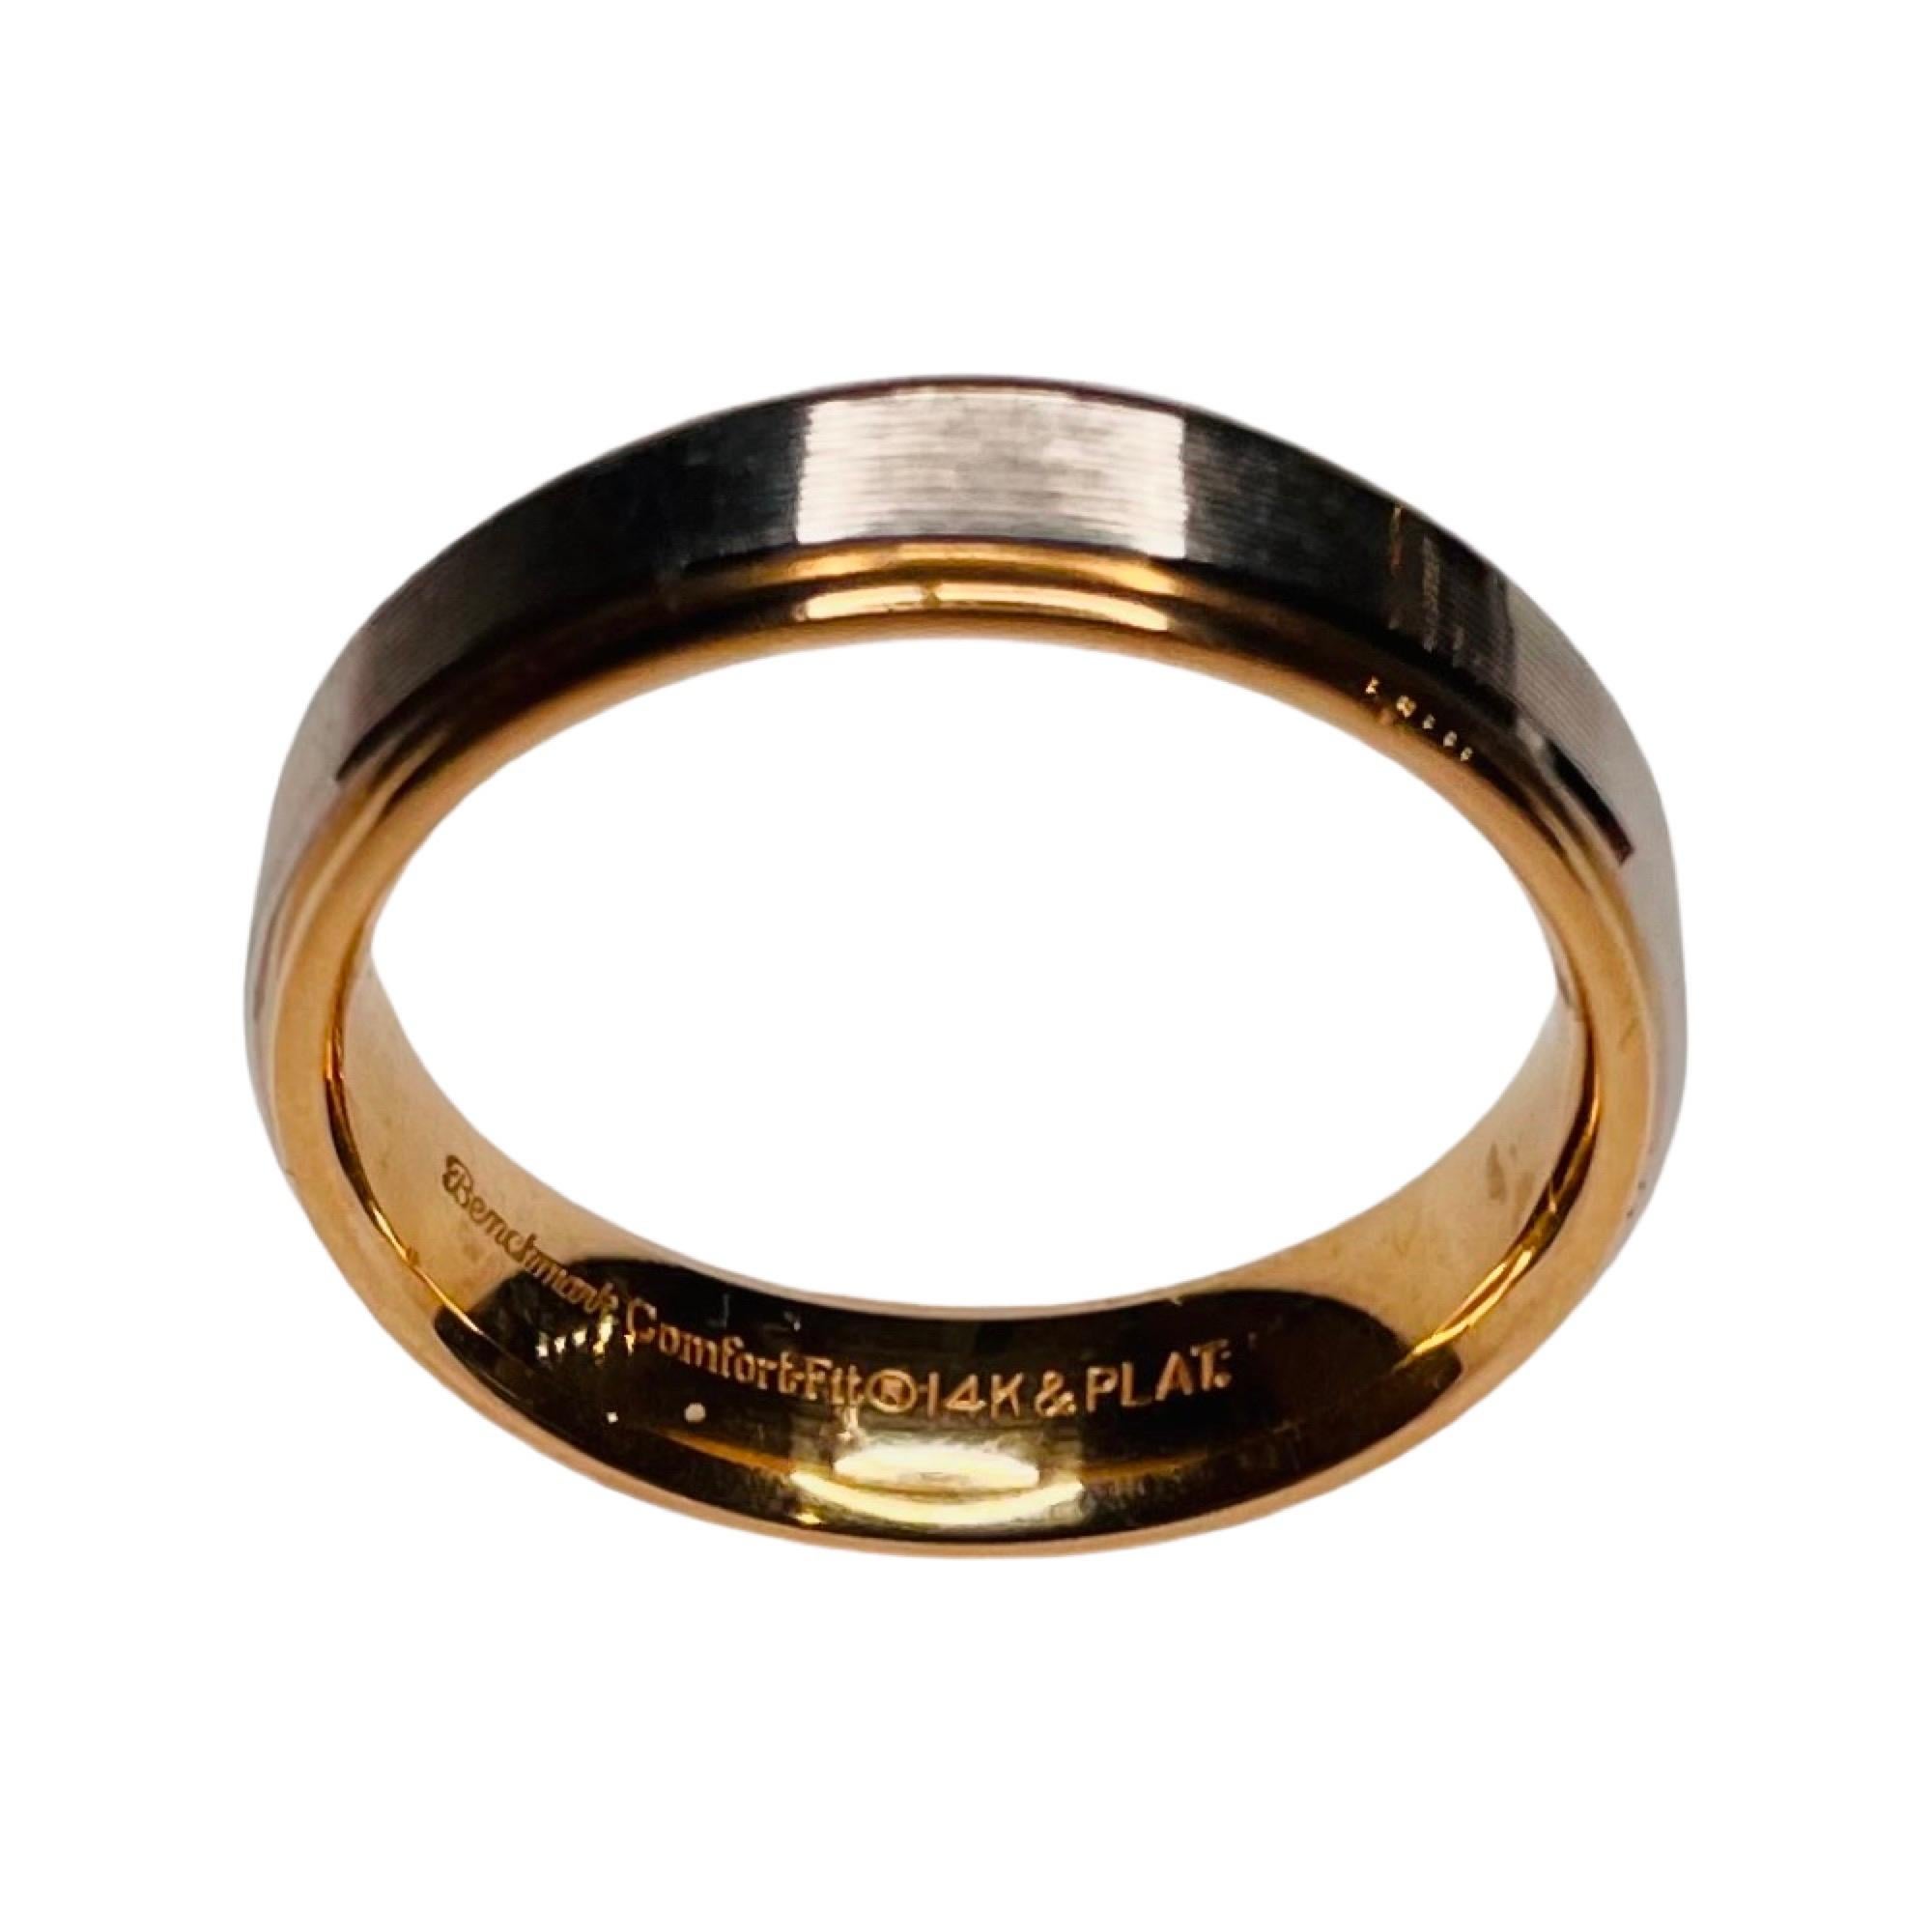 Benchmark 14K Yellow Gold and Platinum Wedding Band. This is a comfort fit band. It is 6.0 mm wide. It has etched platinum in the center with high polish on the outside of the band. It is finger size 10 but we can size it for an addition fee.